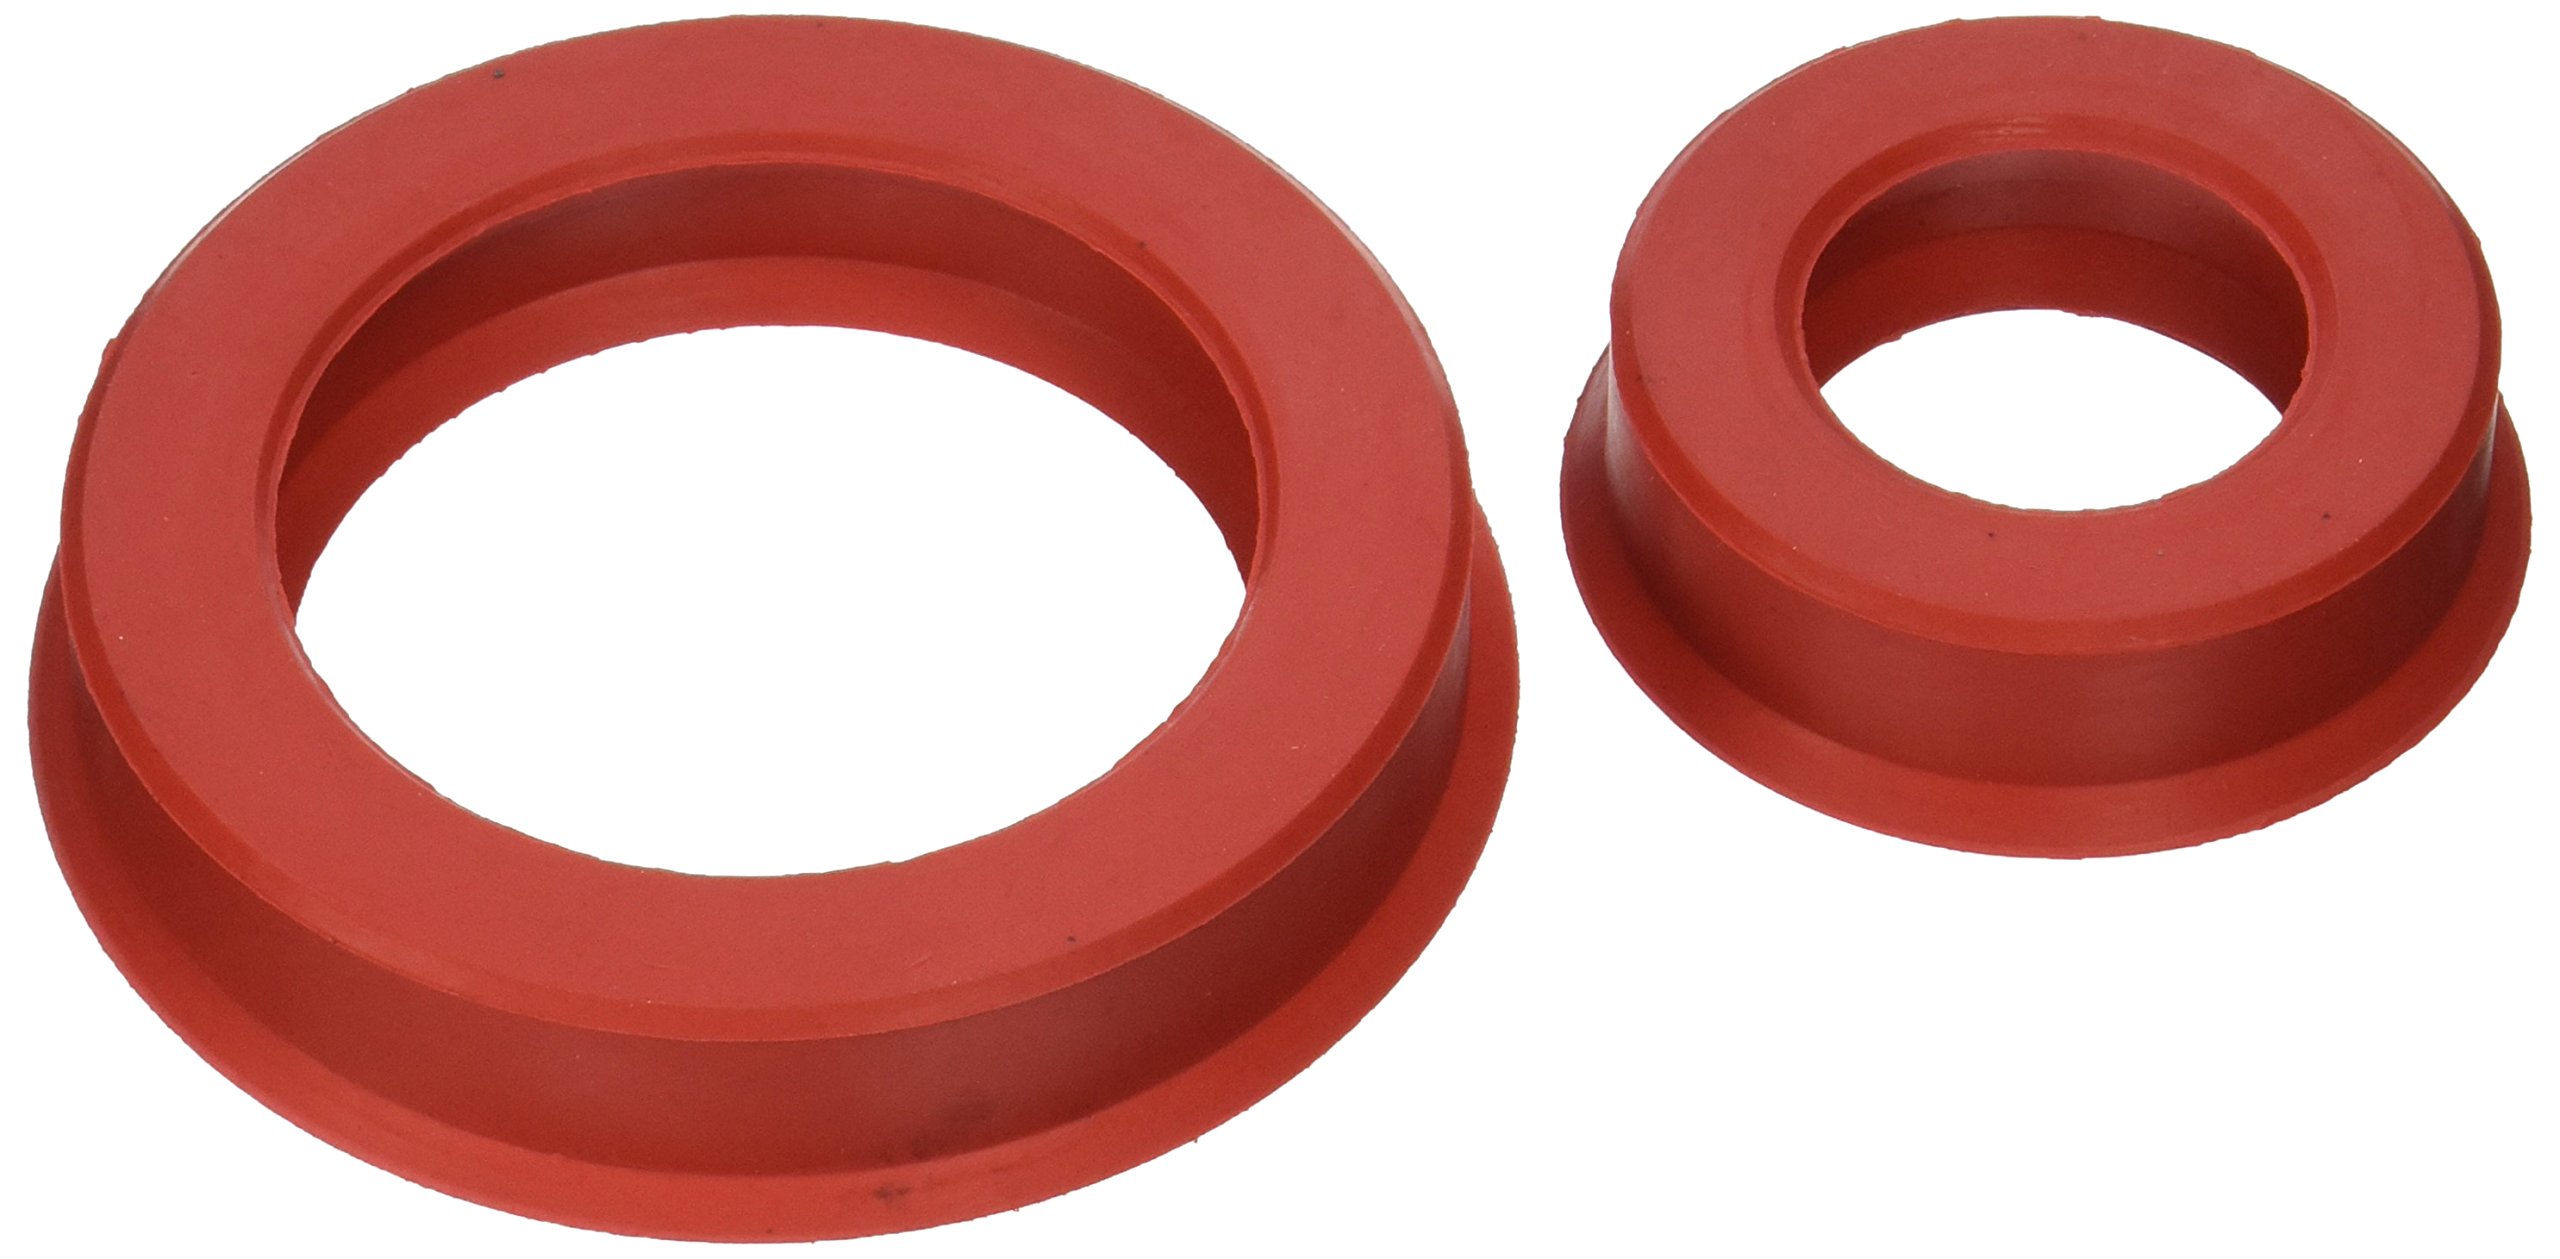 Toolocity STSC0035 Water Containment Rings for Core Drilling